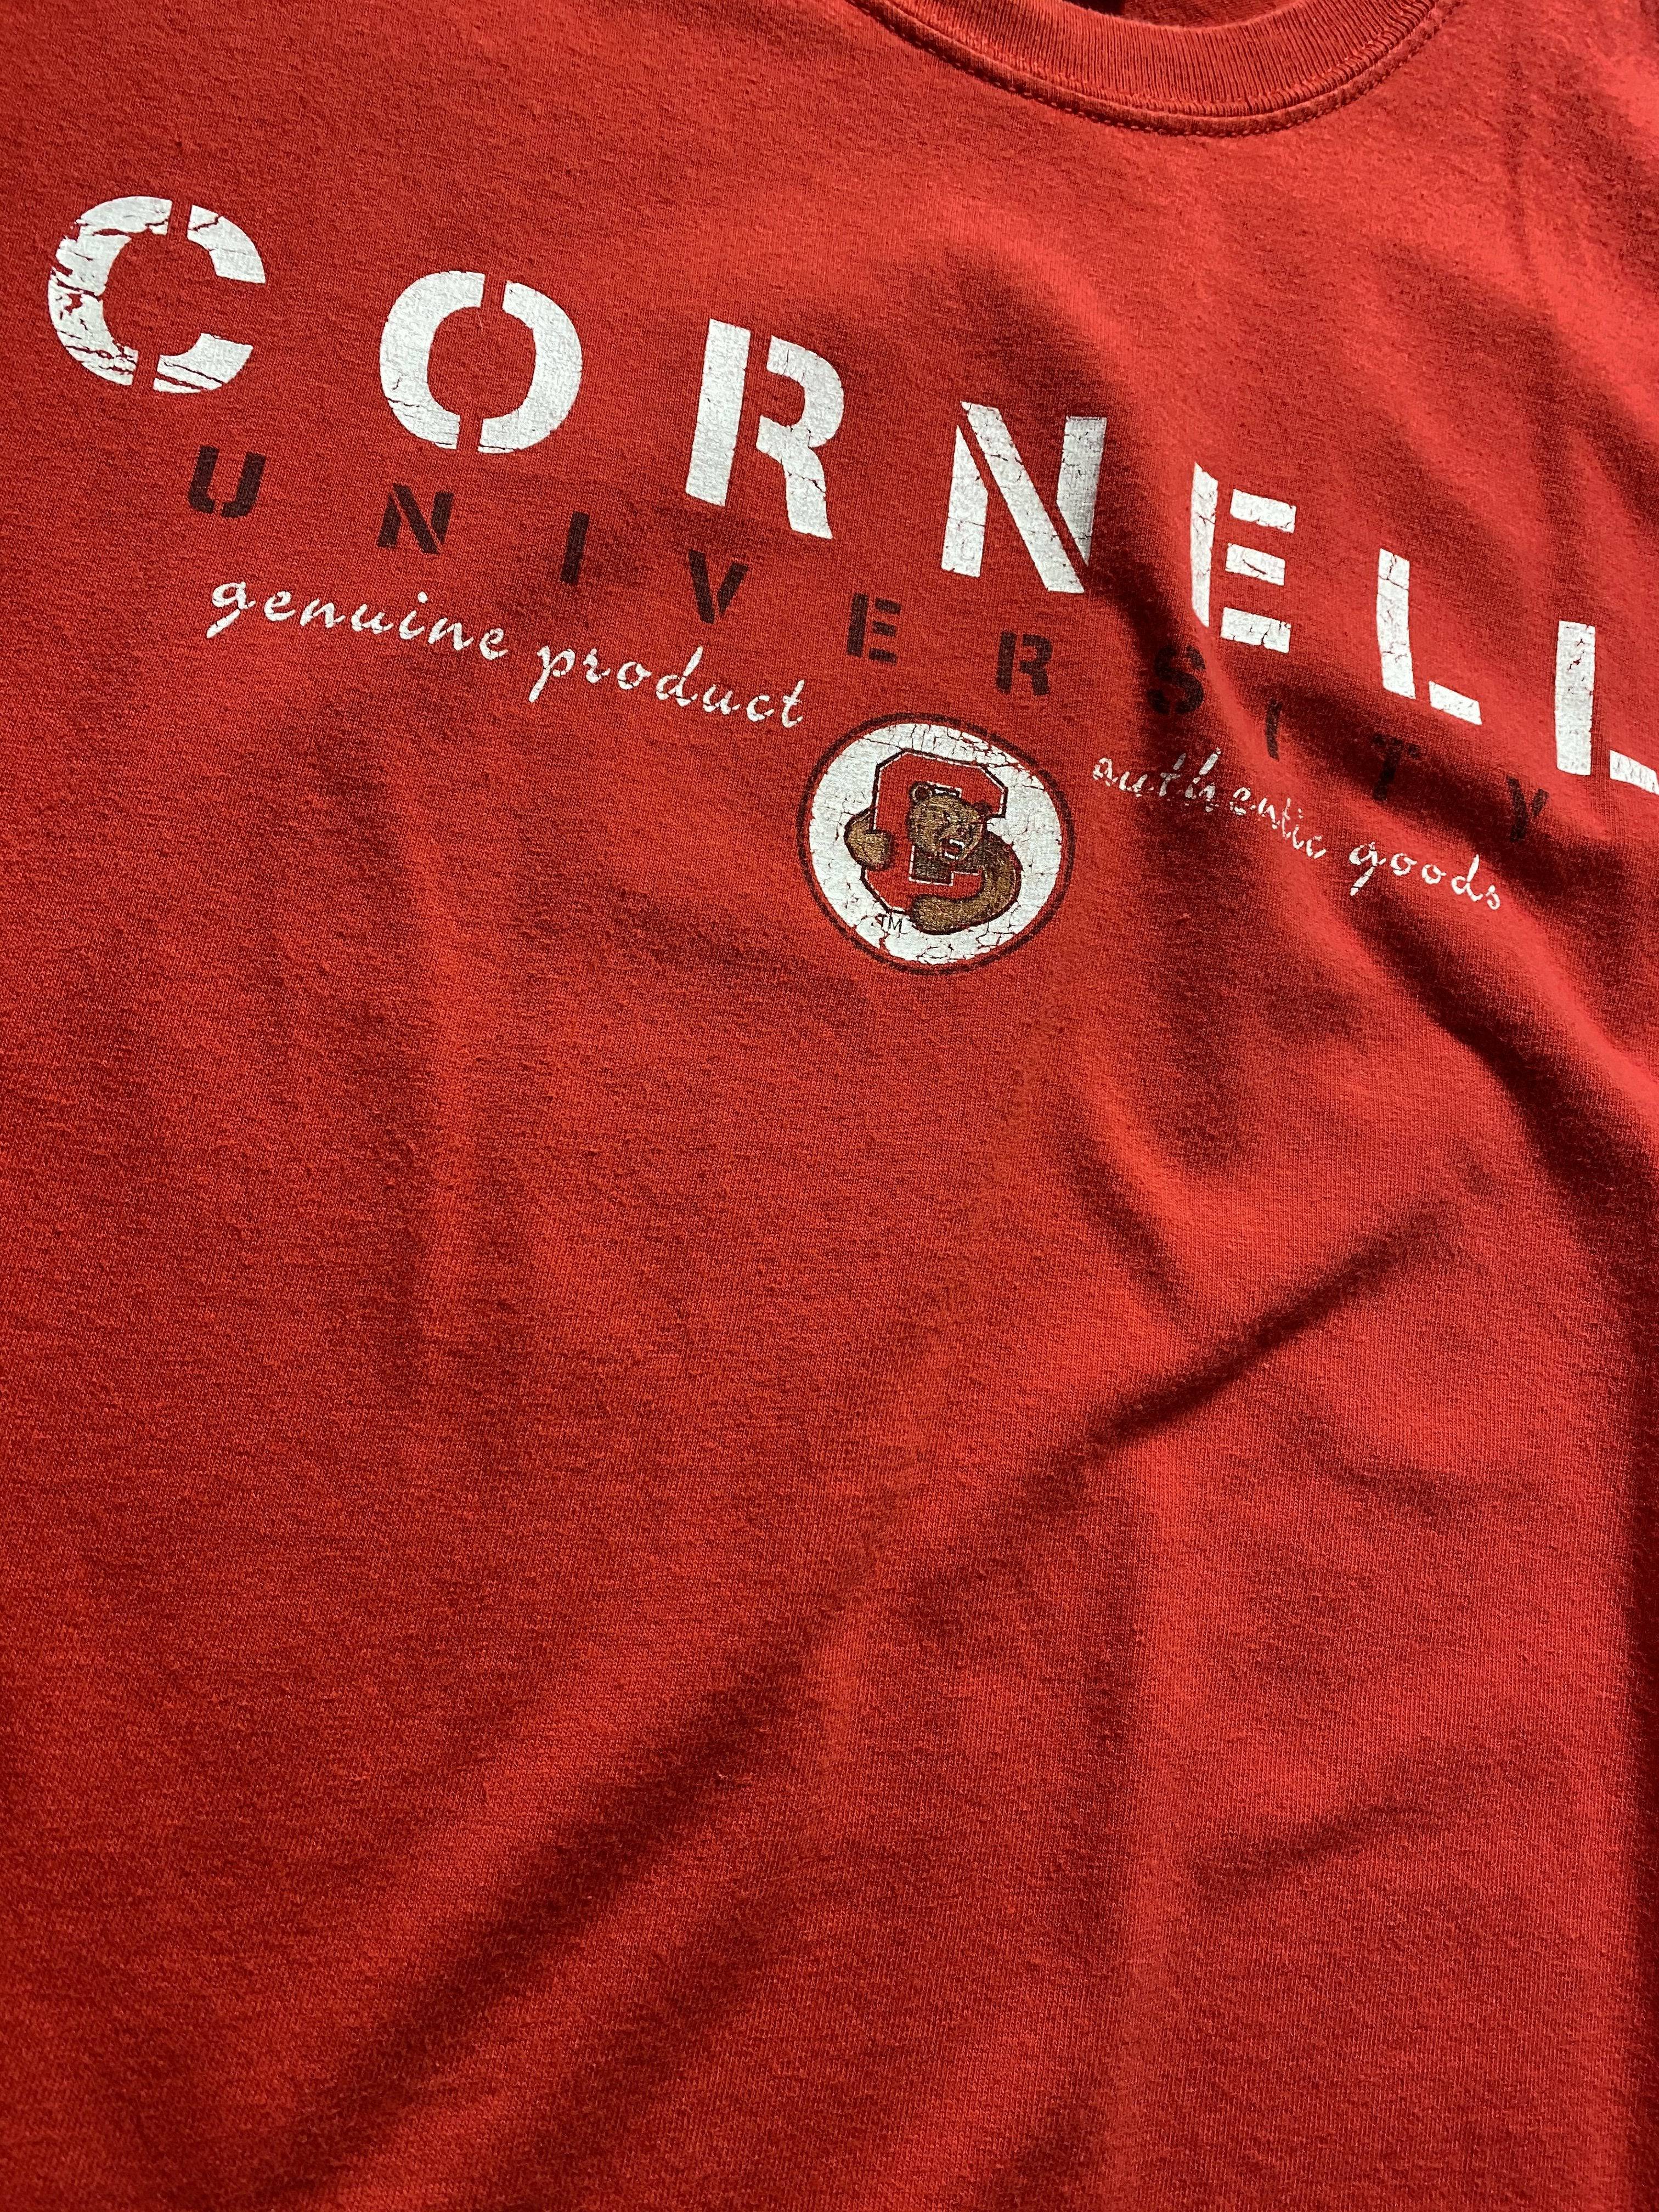 Vintage Cornell University Shirt Red // Small - RHAGHOUSE VINTAGE